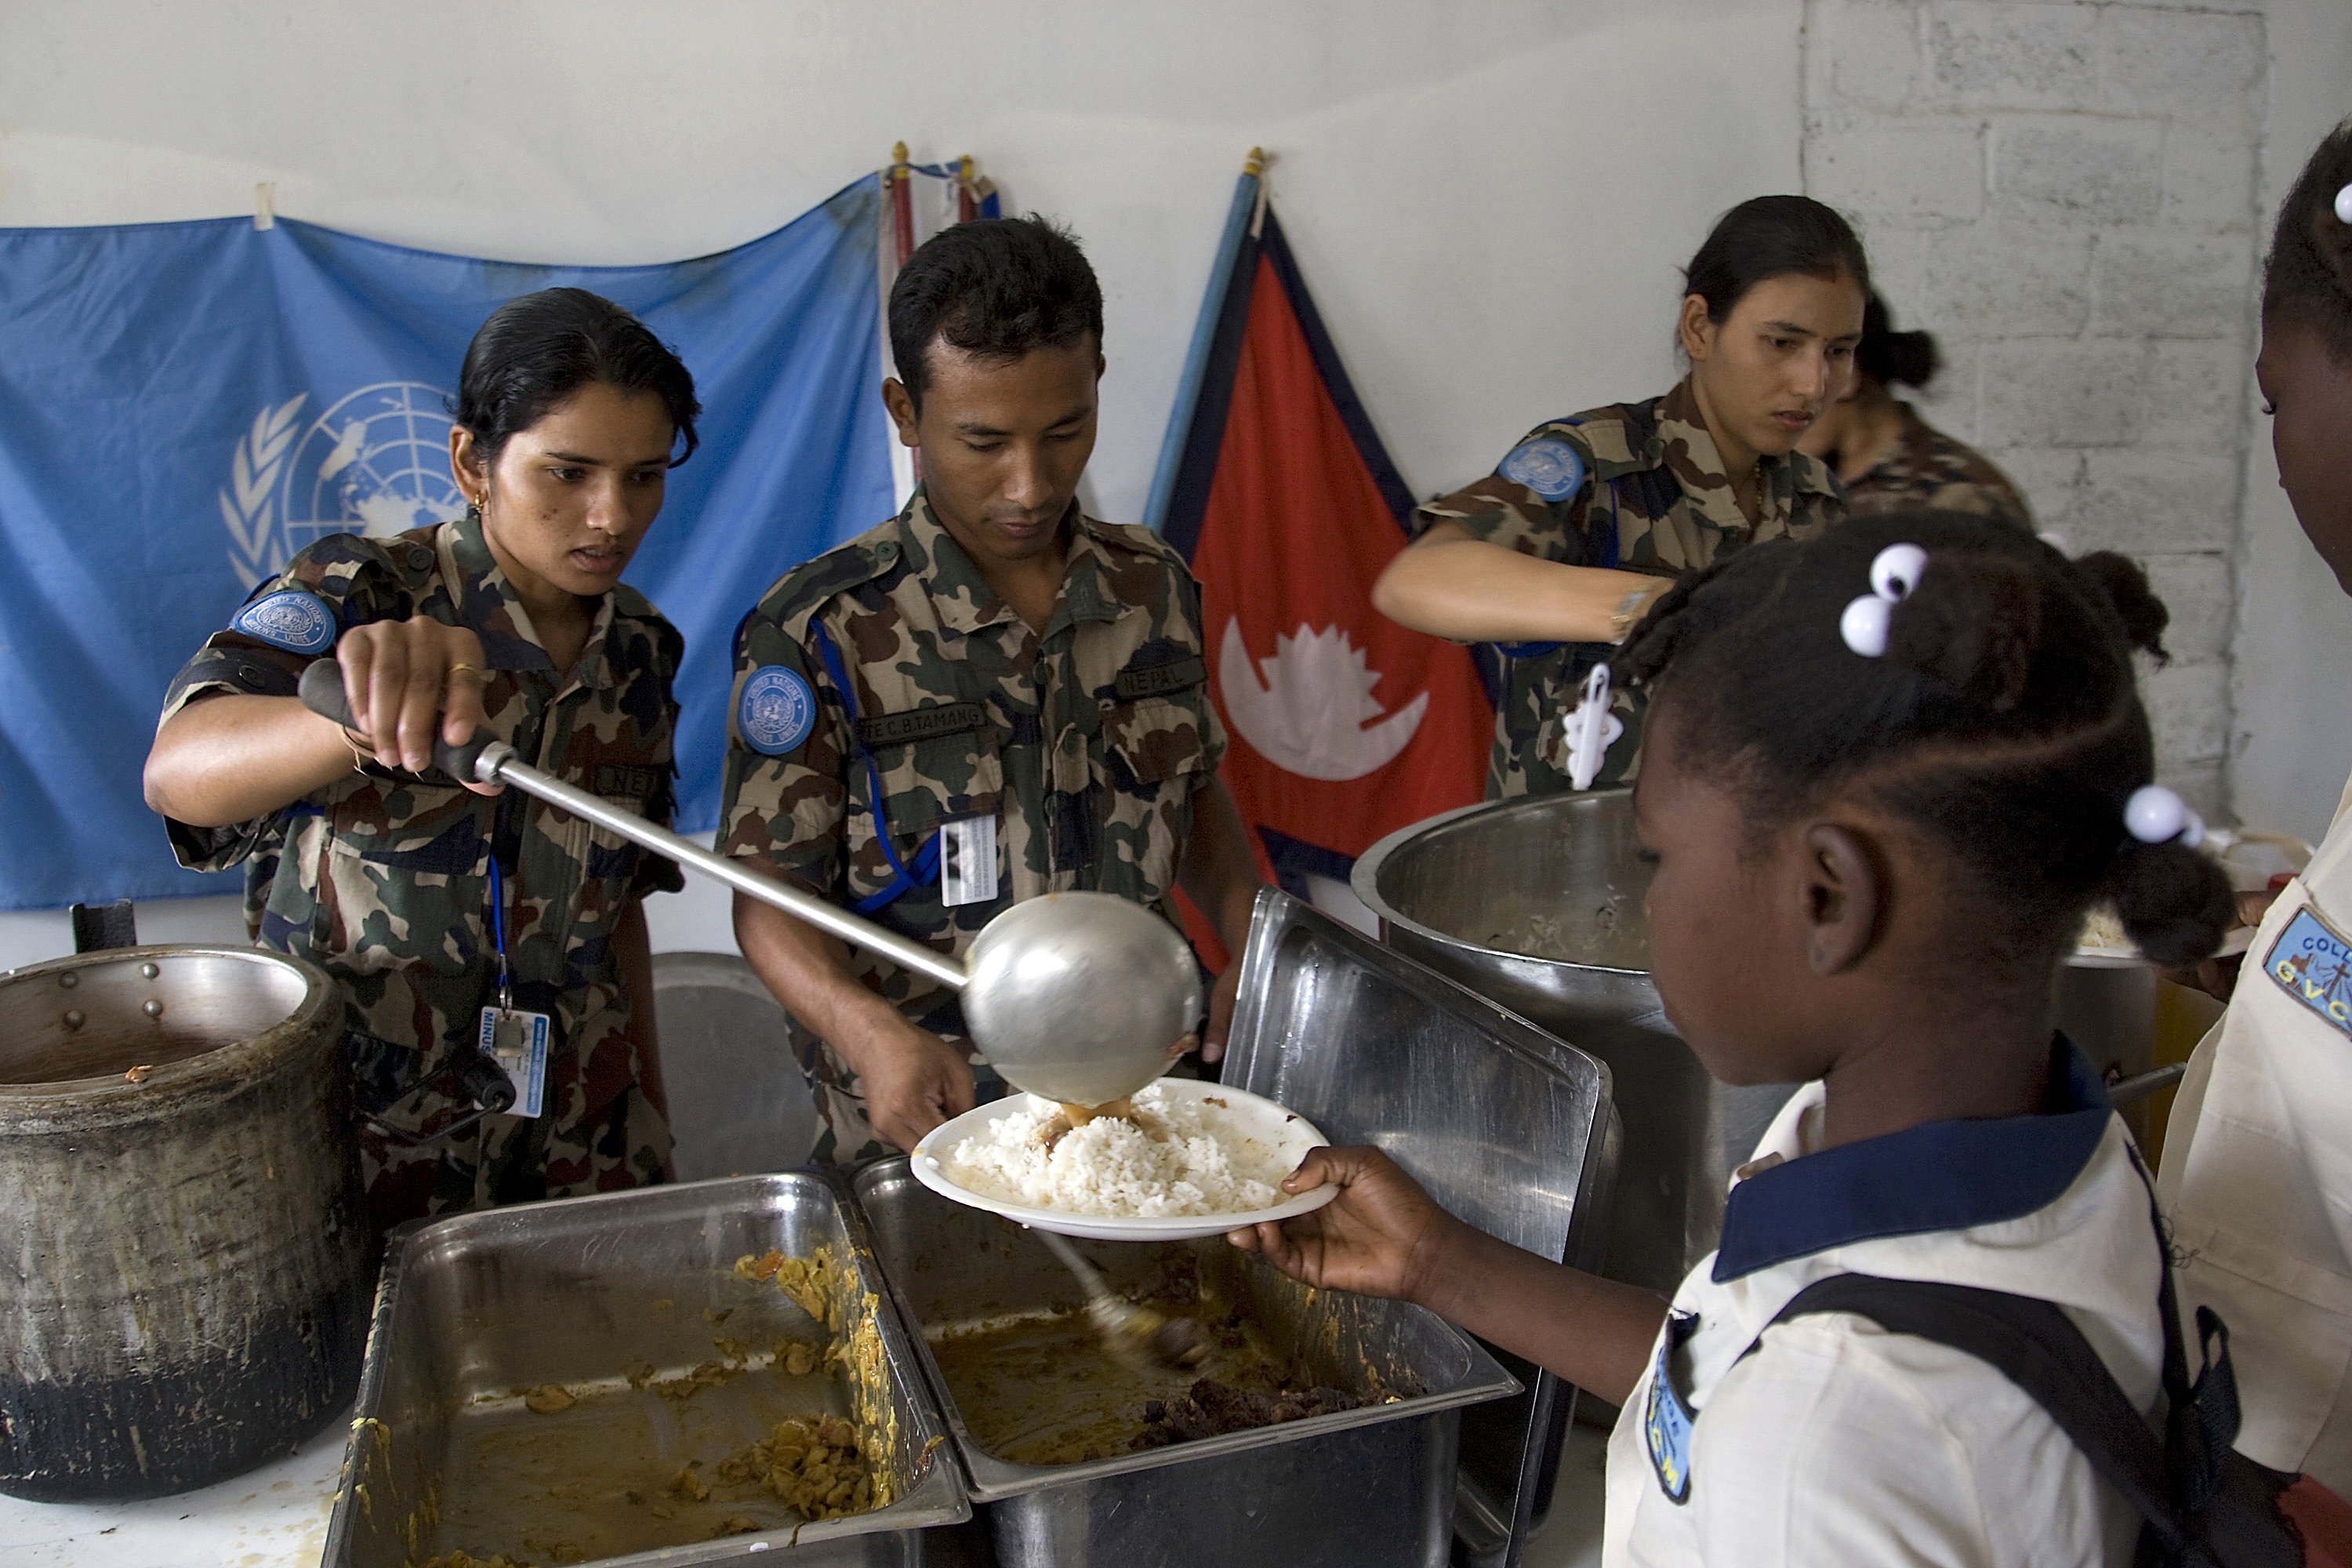 UN peacekeepers serve food to people displaced by the earthquake in Haiti in January 2010